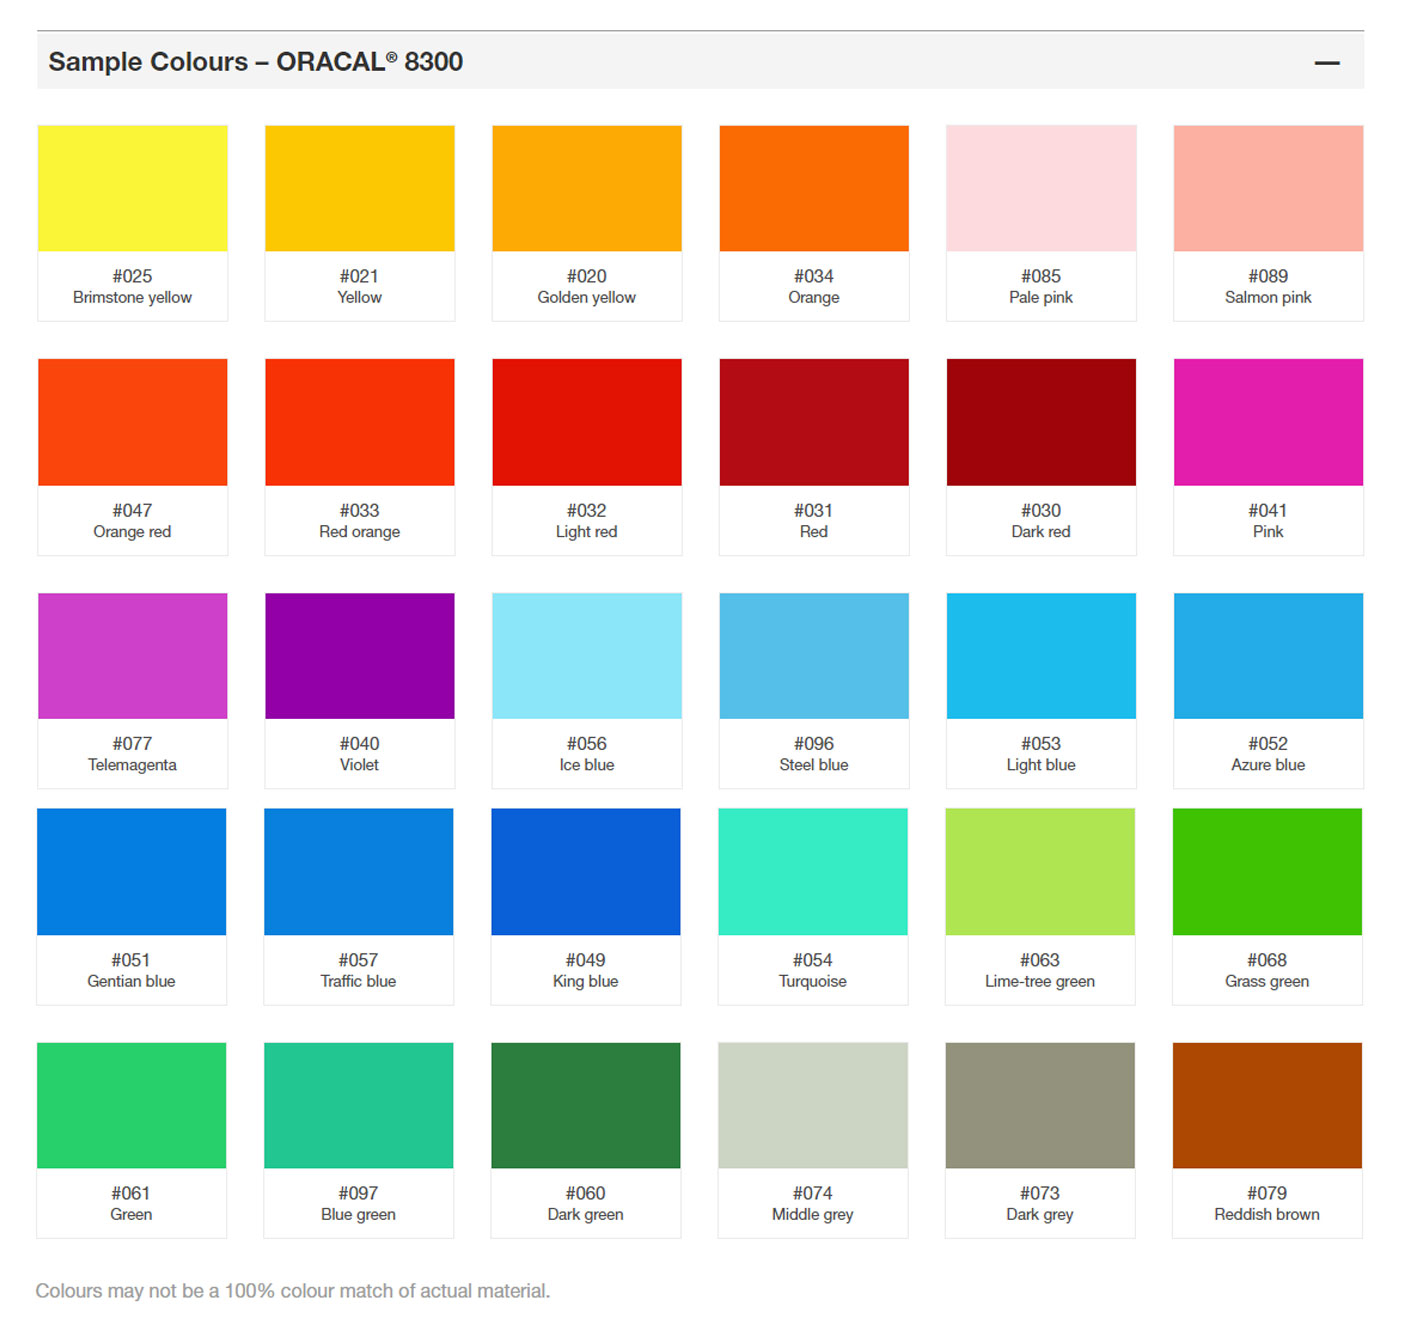 oracal 8300 color chart